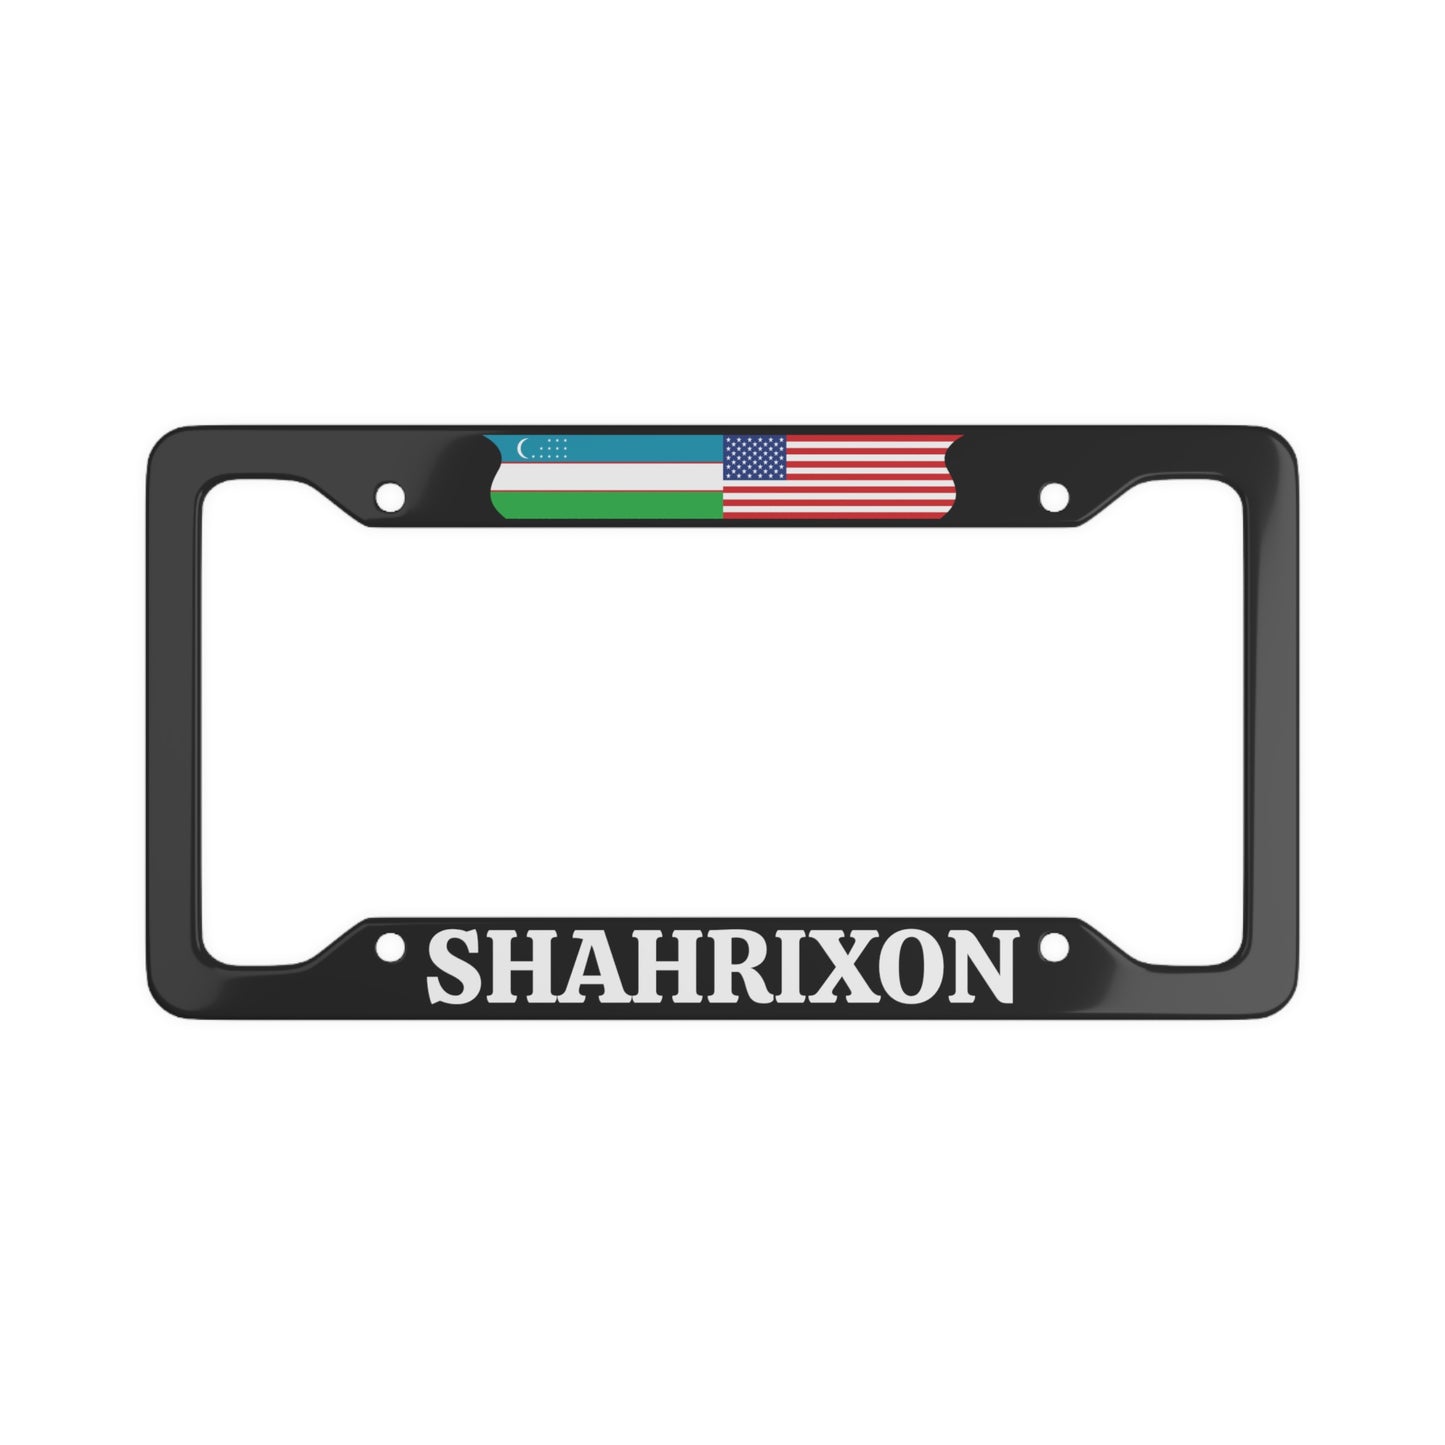 Shahrixon with flag License Plate Frame